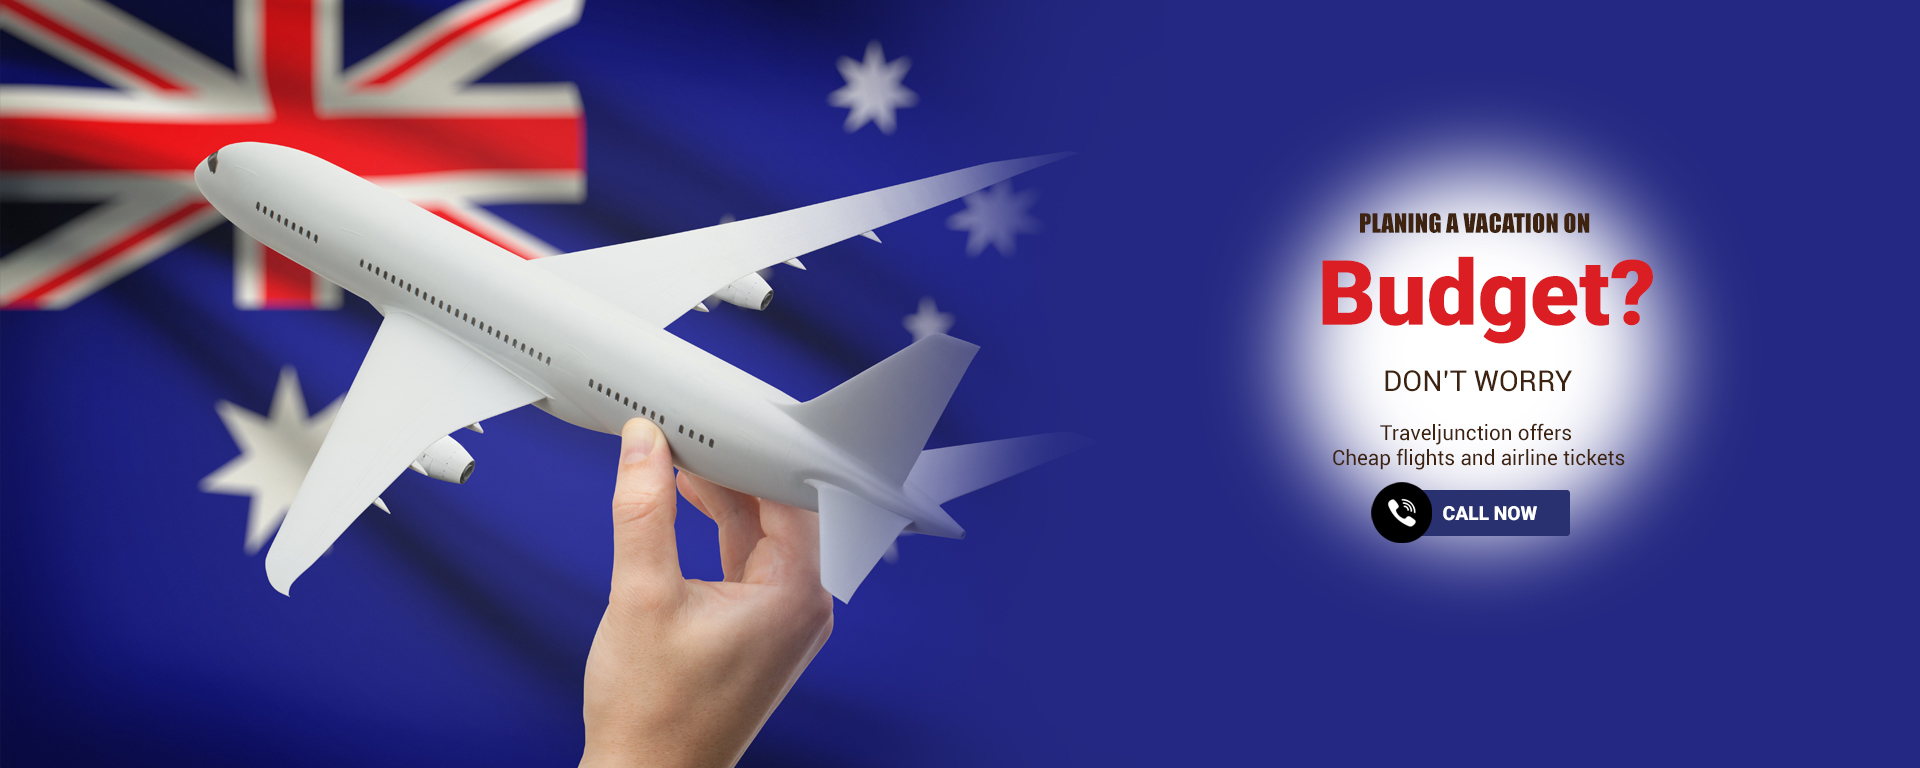 Exclusive Easter special cheap flights deals at traveljunction.co.uk and book lowest air flight